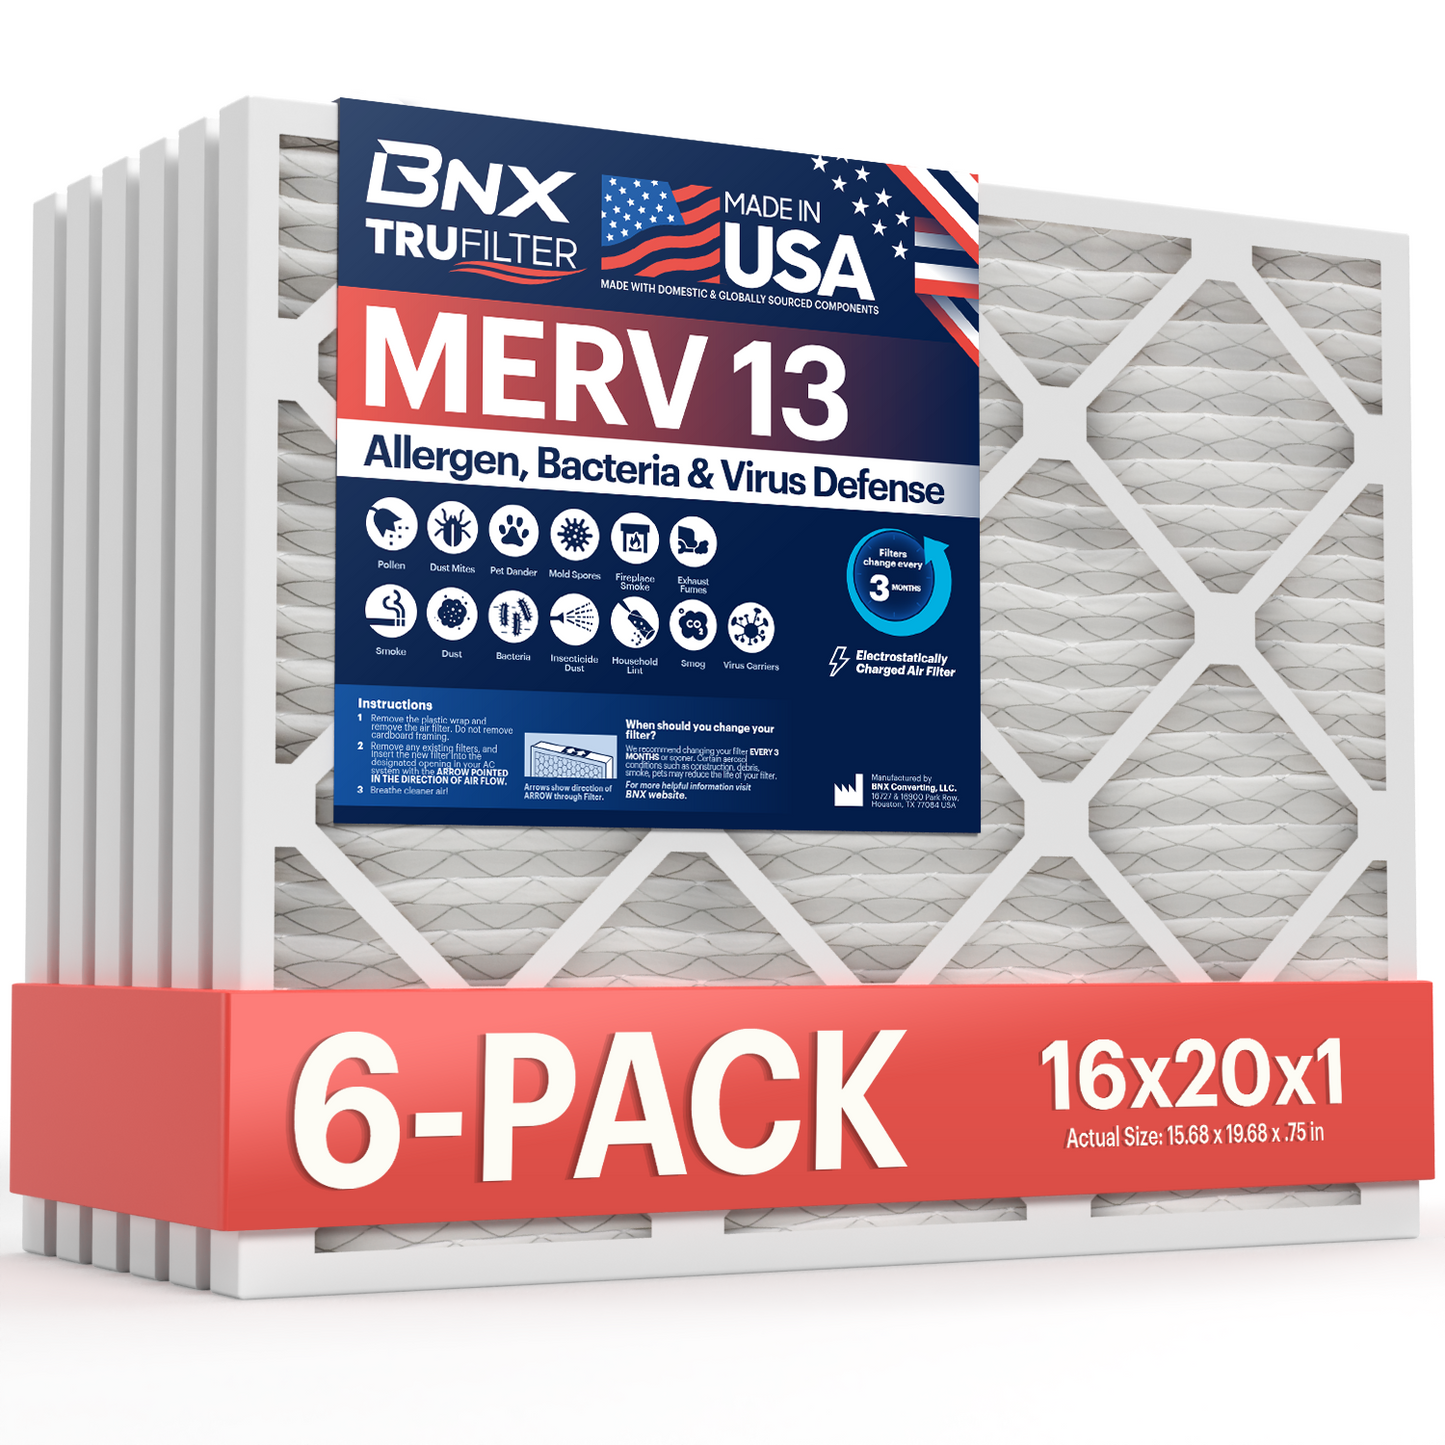 BNX TruFilter 16x20x1 MERV 13 Pleated Air Filter – Made in USA (6-Pack)